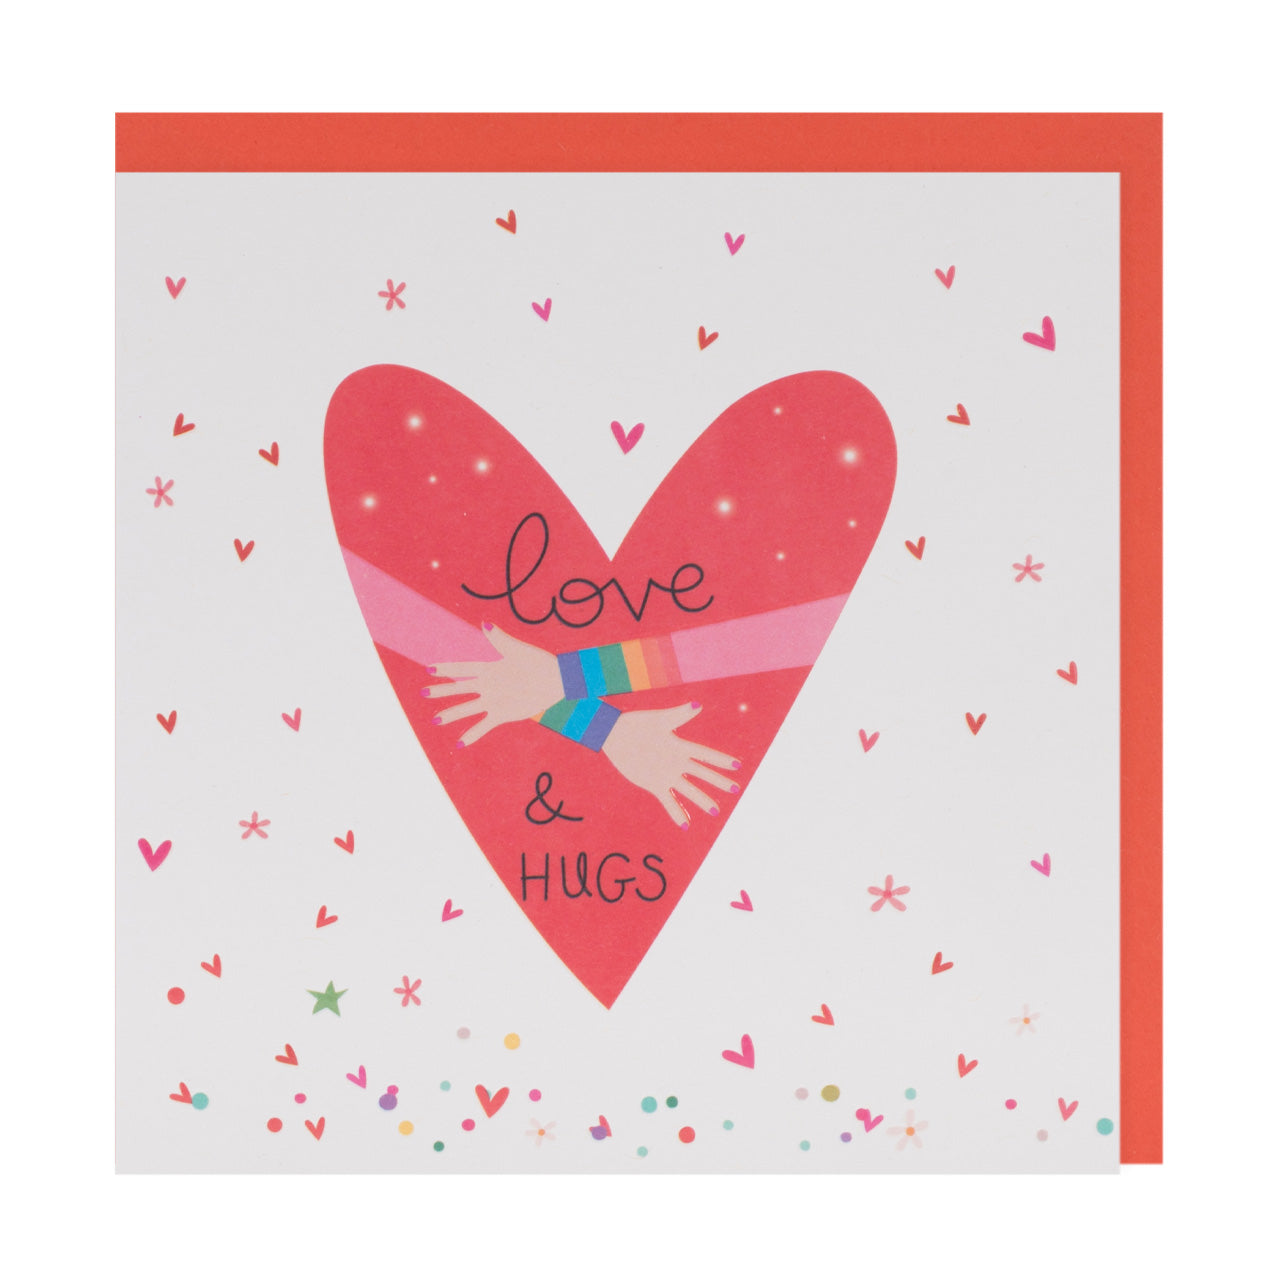 Love & Hugs Greetings Card - Belly Button Designs